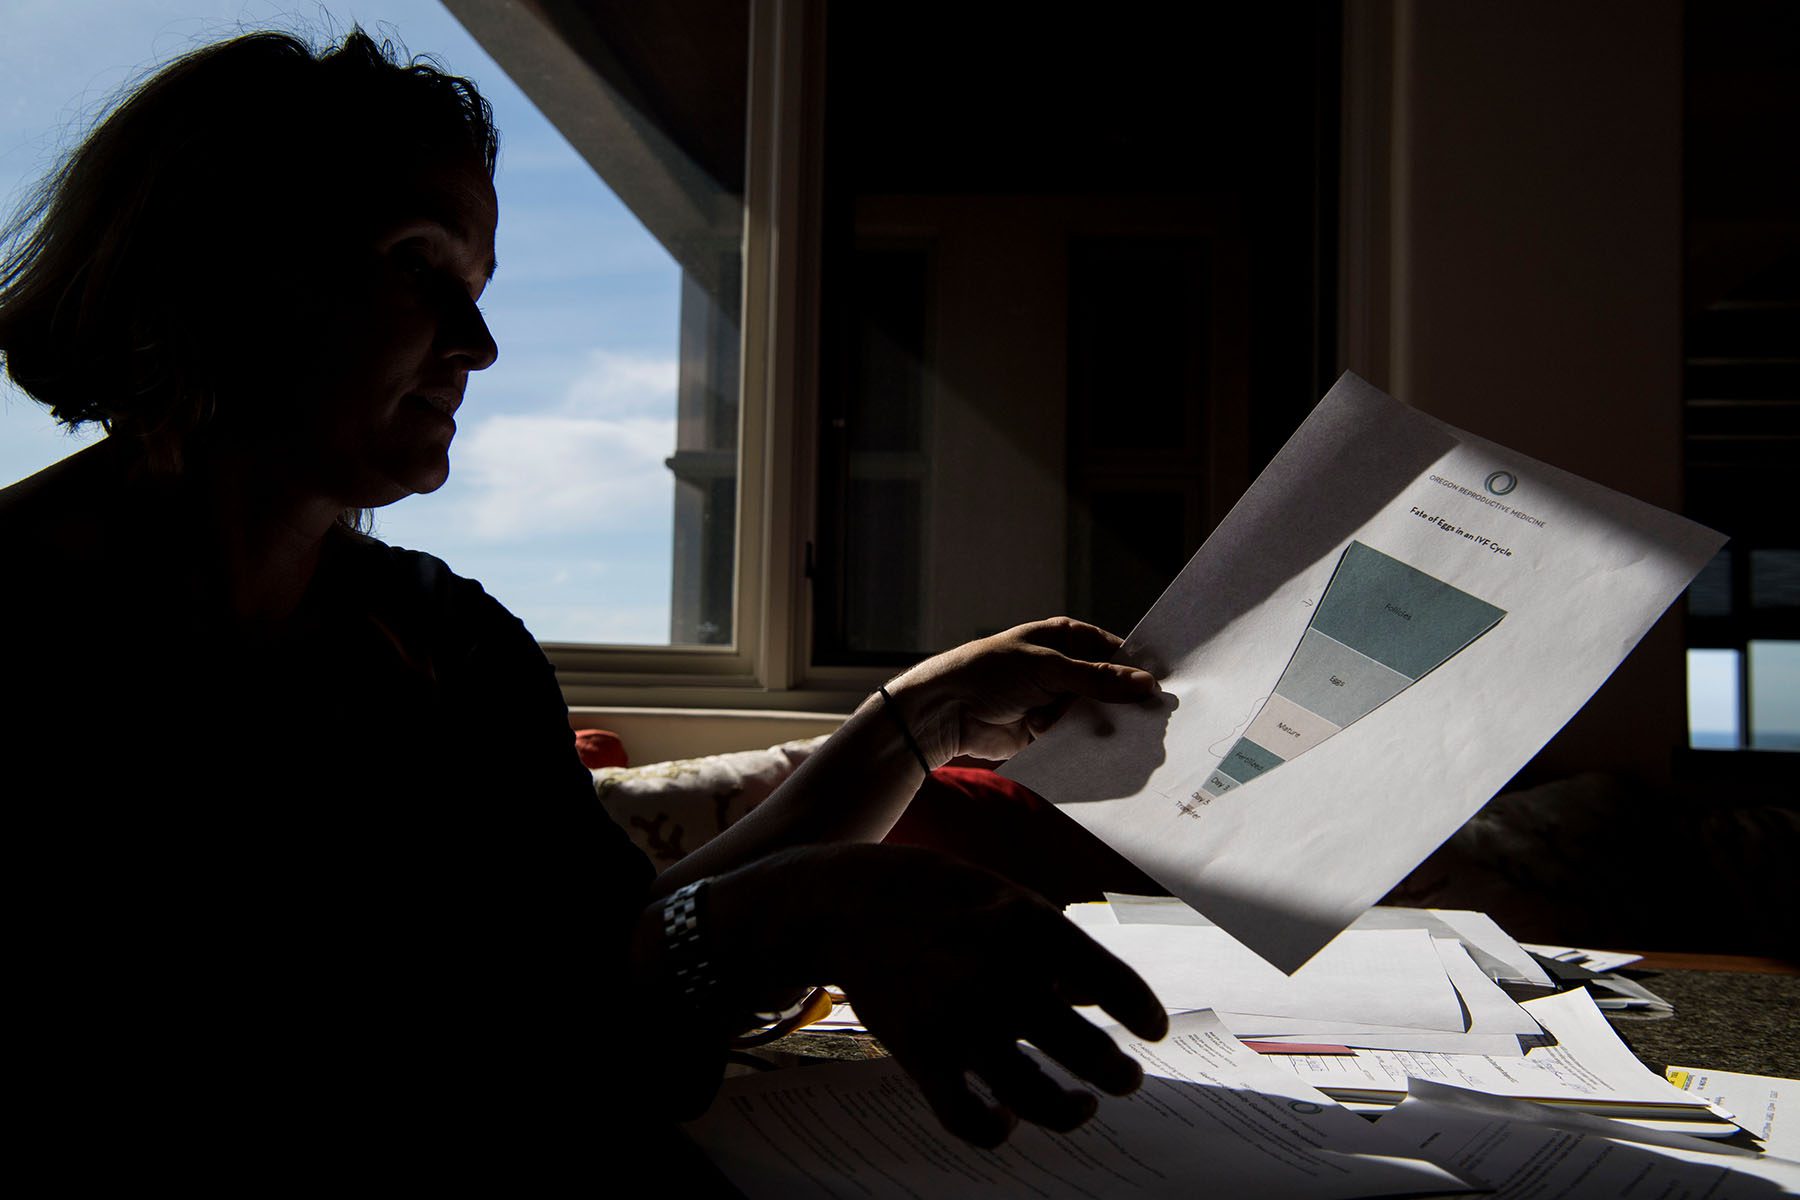 A woman goes through the paperwork for her egg freezing, IVF, and other fertility procedures and treatments. She is near a window and only her silhouette is visible while the sun shines on the paperwork she's reading.